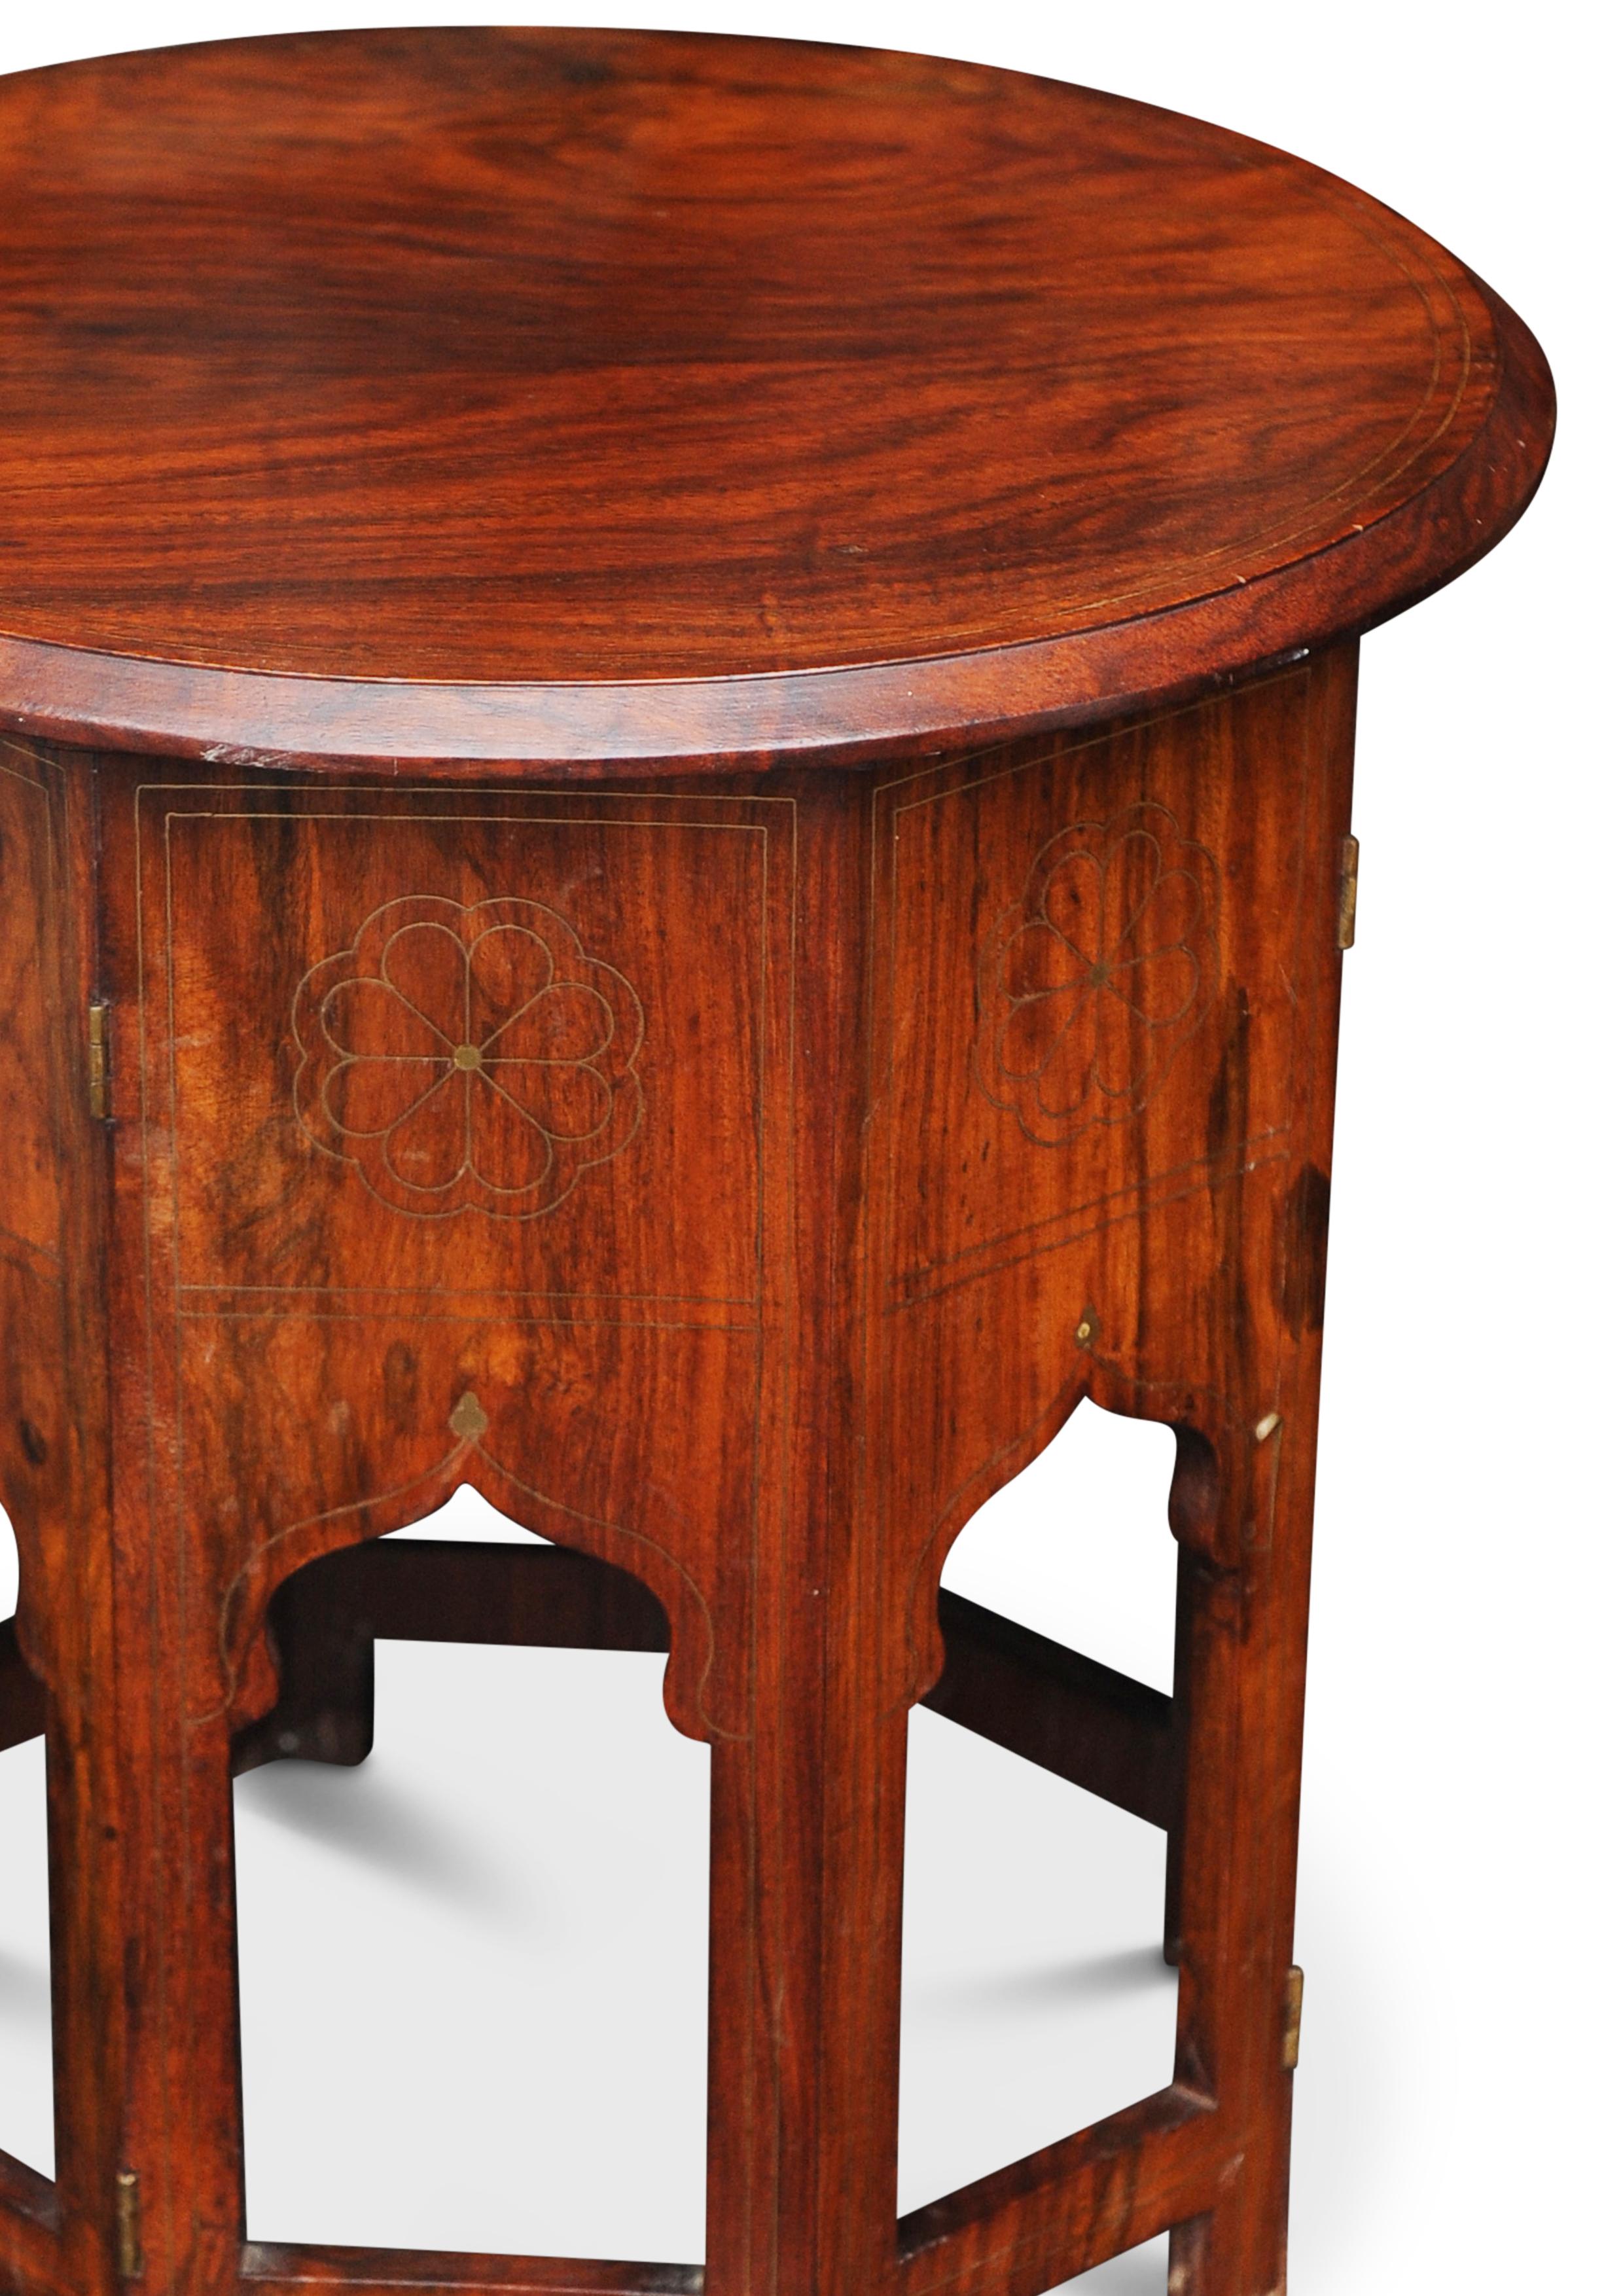 Hand-Carved Rare Antique Liberty & Co. Table Middle Eastern Moorish Moroccan Damascus For Sale